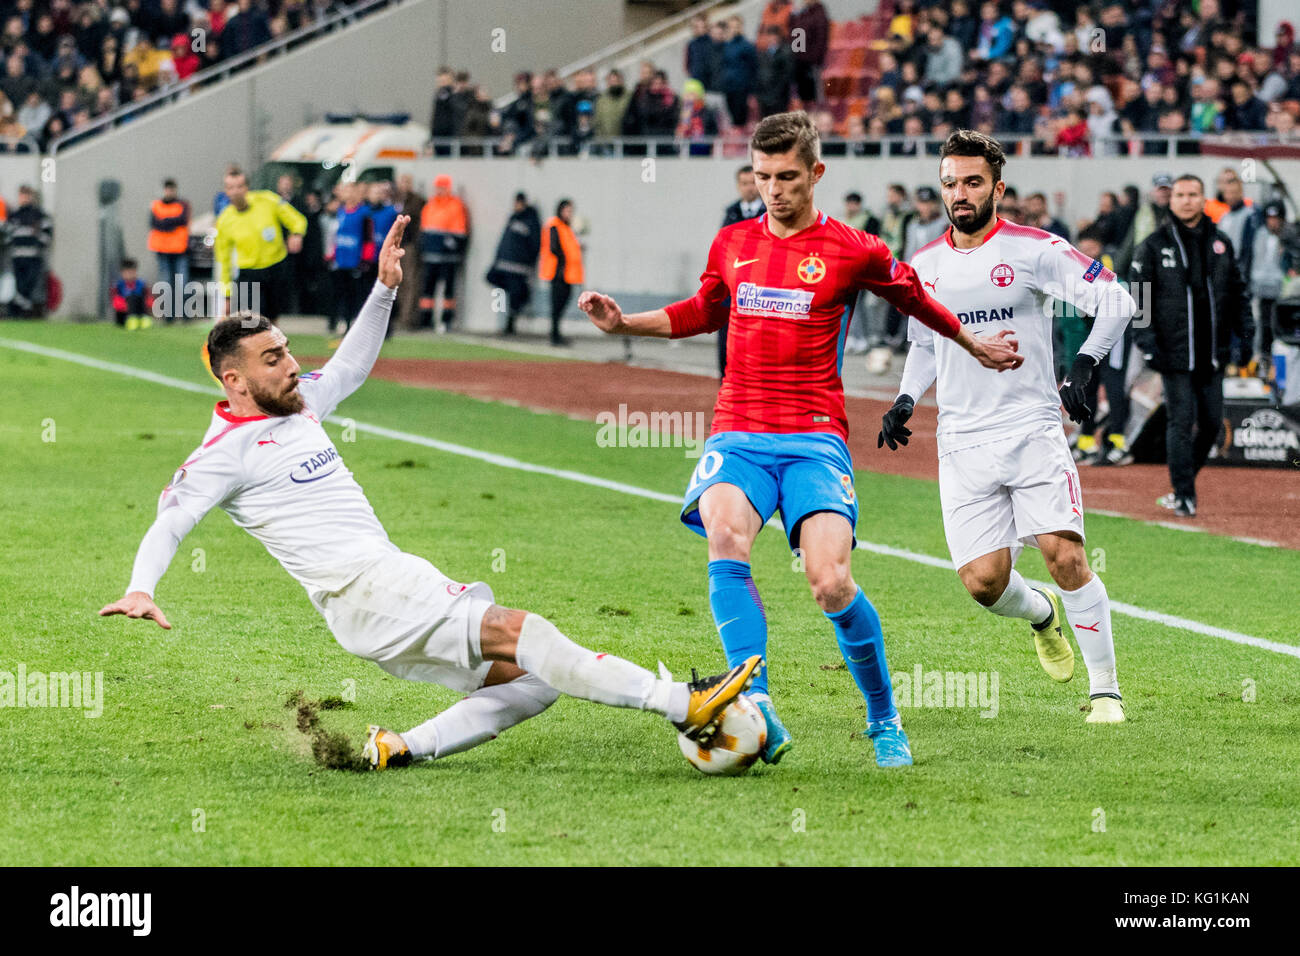 November 3, 2017: Constantin Budescu #11 (FCSB Bucharest) during the UEFA  Europa League 2017-2018, Group Stage, Groupe G game between FCSB Bucharest  (ROU) and Hapoel Beer-Sheva FC (ISR) at National Arena Stadium, Bucharest,  Romania